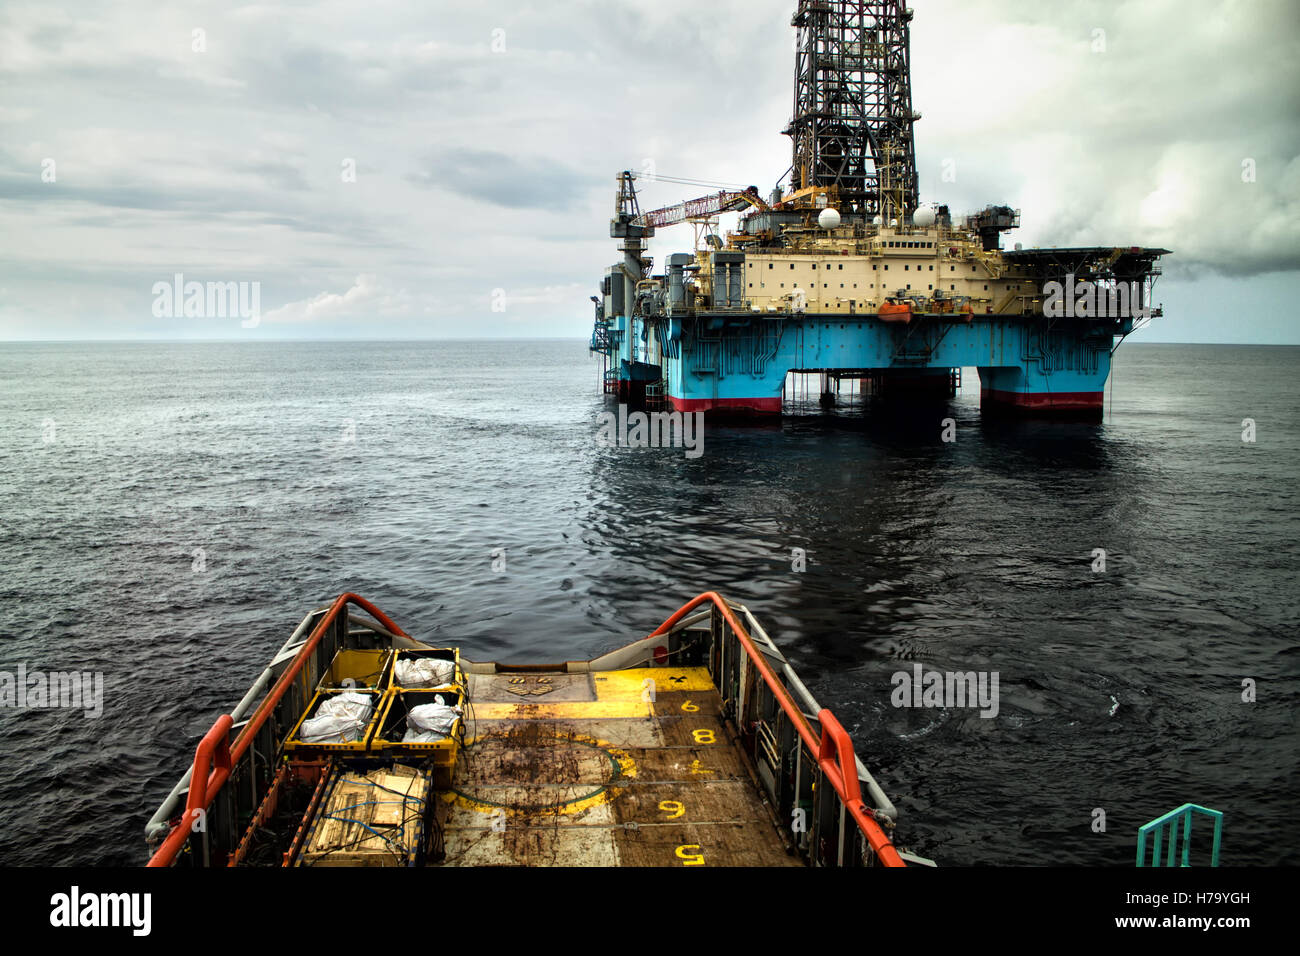 Anchor-handling Tug/Supply (AHTS) vessel during dynamic positioning (DP) operations near Oil Rig. Stock Photo